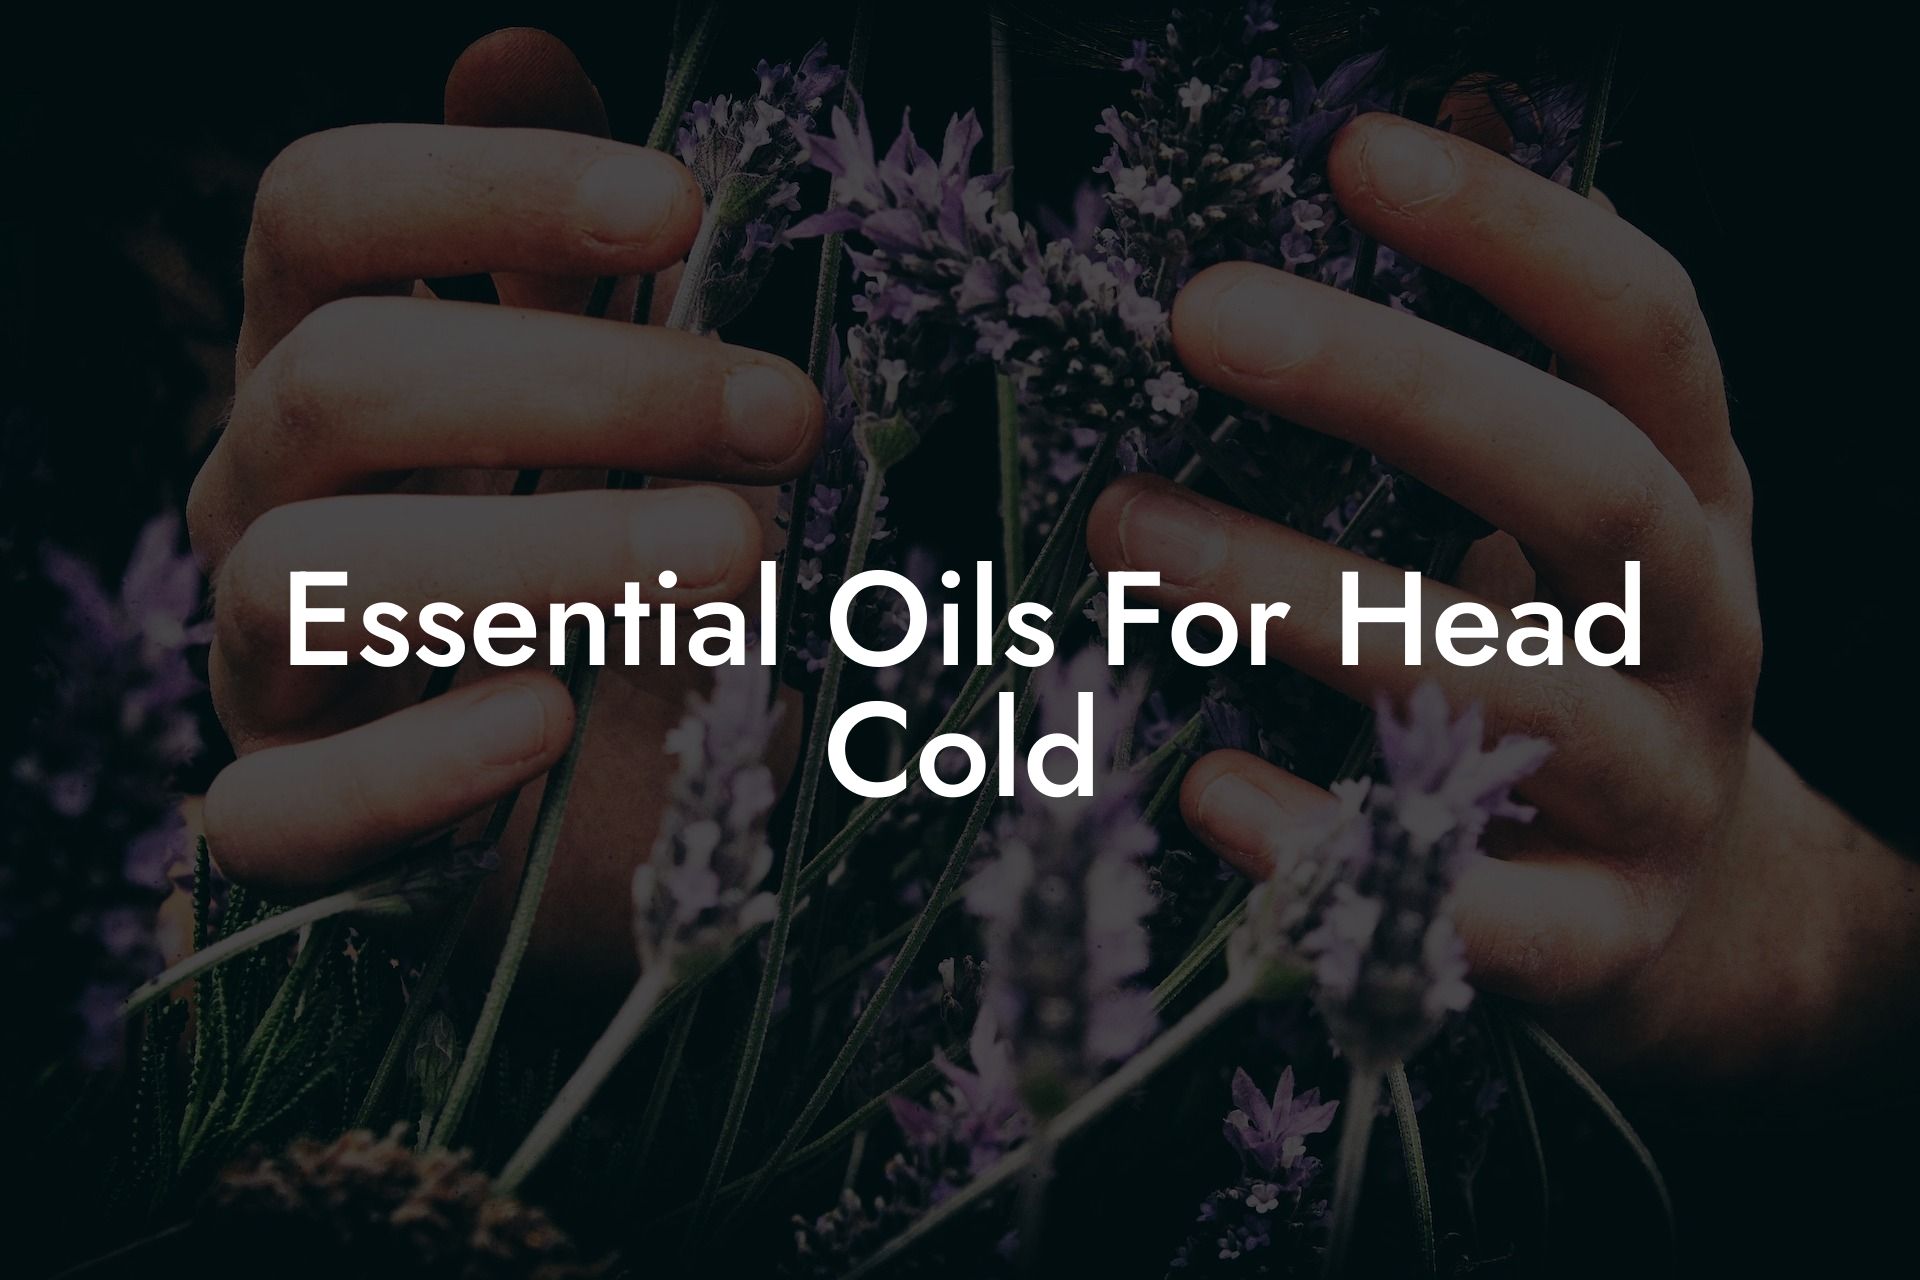 Essential Oils For Head Cold